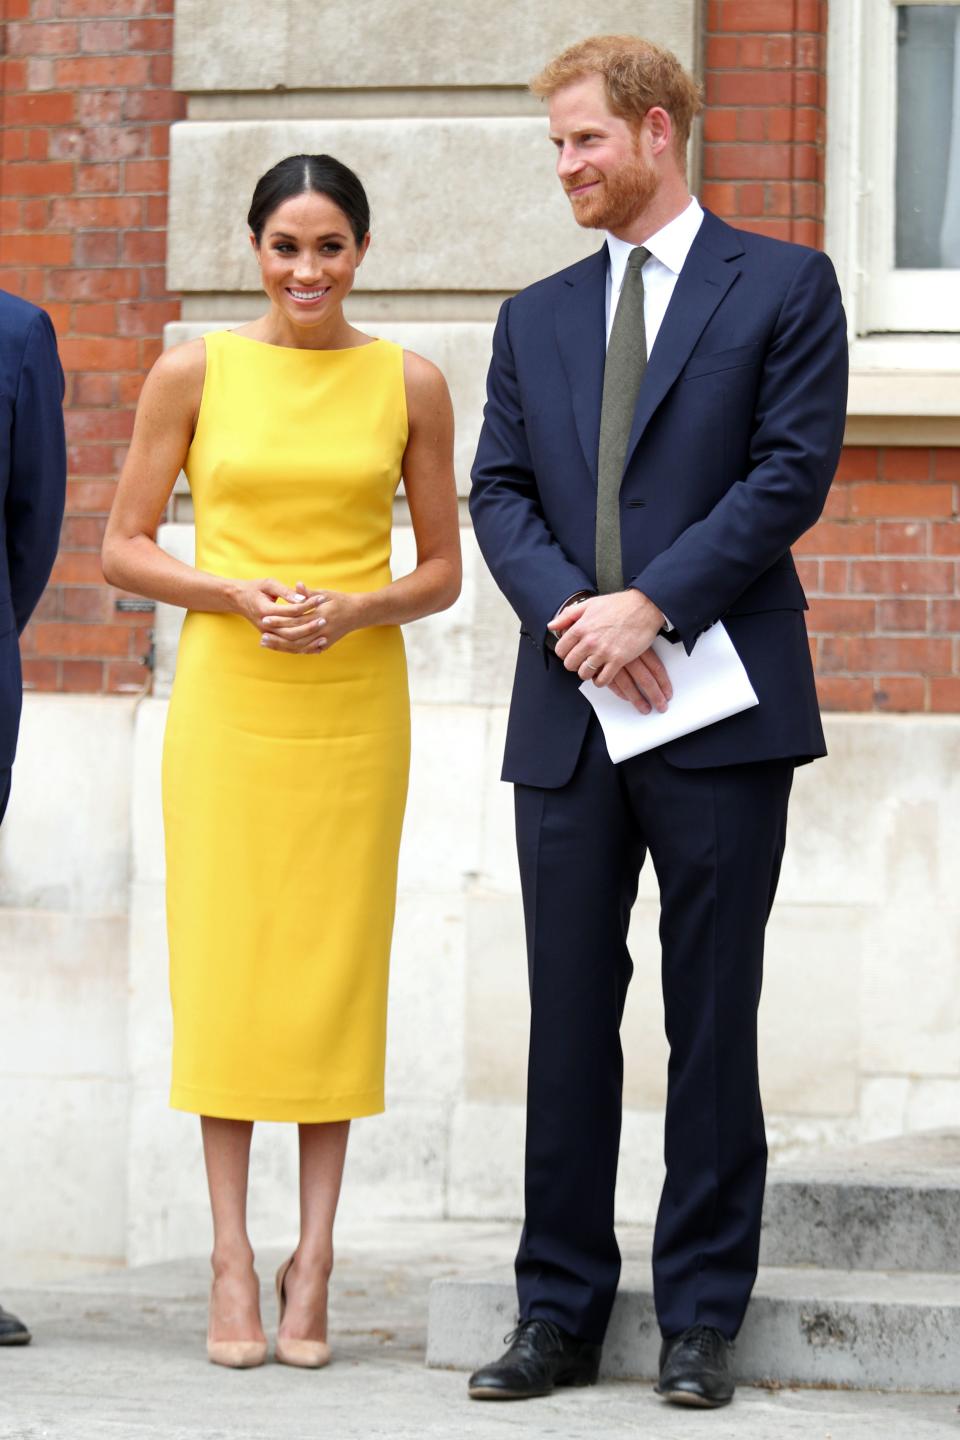 Meghan hasn’t been shy of wearing colour, donning this bright yellow dress at a royal event earlier this month. Photo: Getty